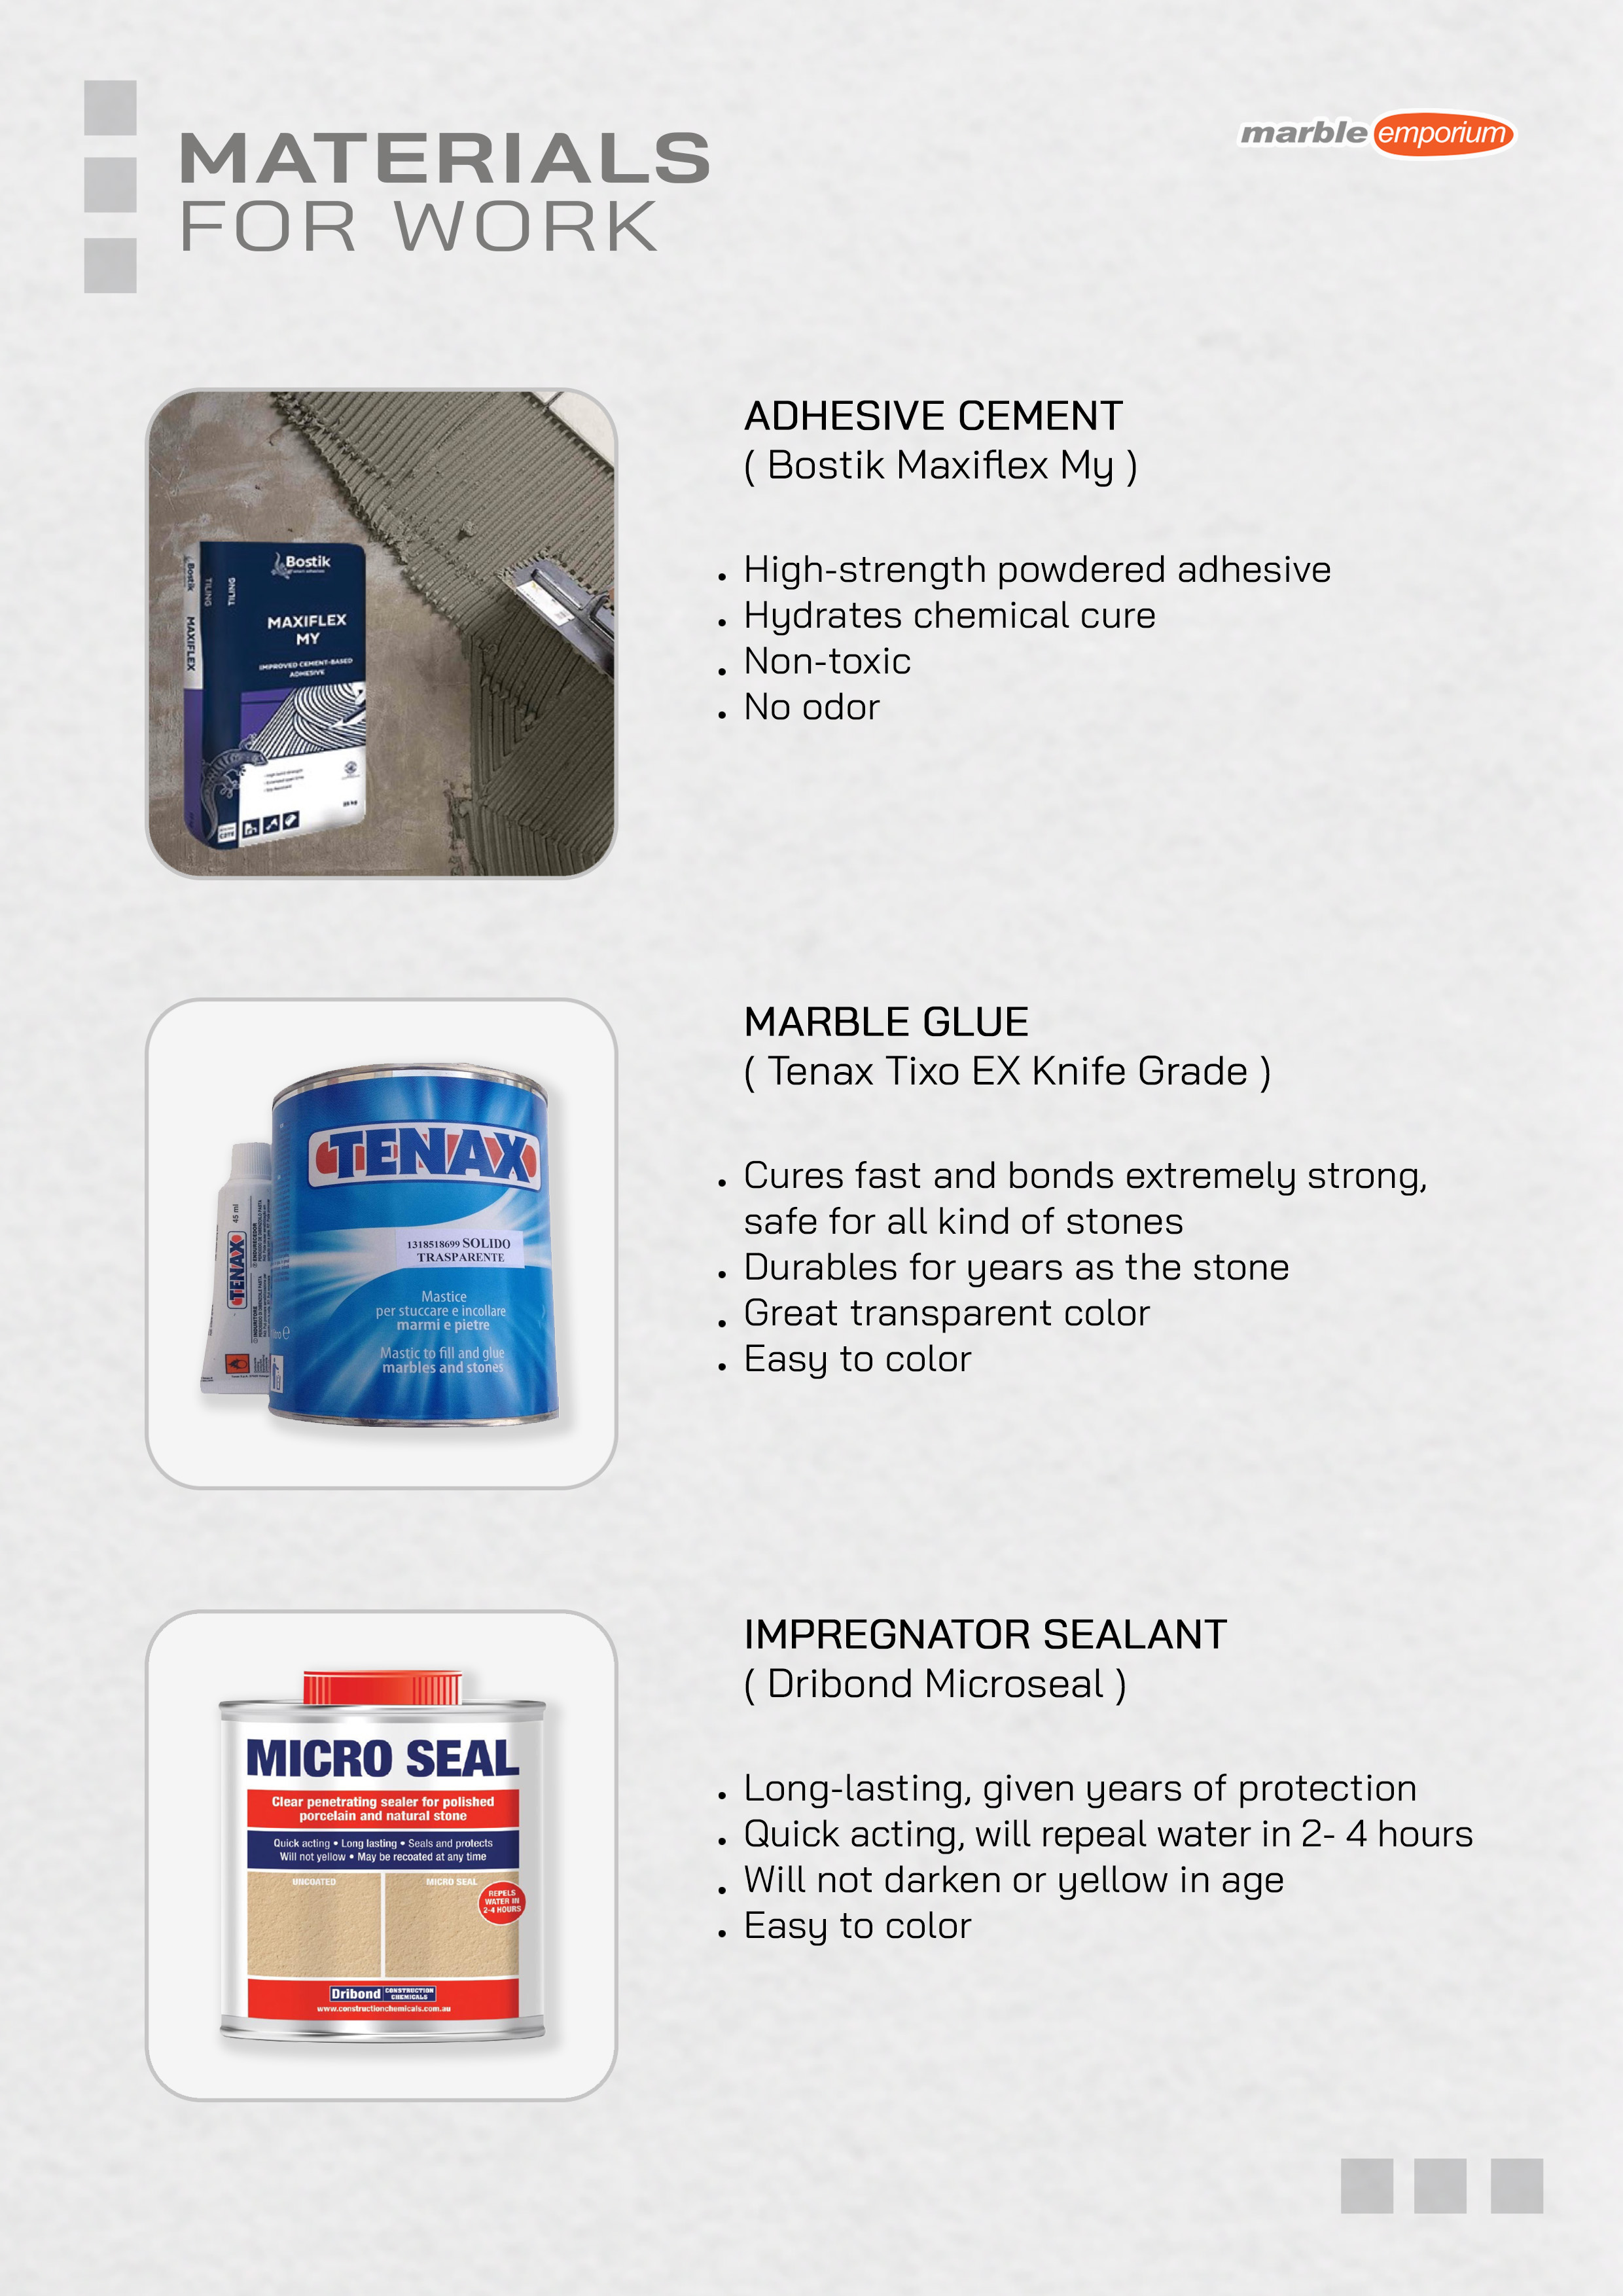 Marble Emporium | How we work page 23 - Materials for work - Adhesive Cement ( Bostik Maxiflex My ) - High-strength powdered adhesive, Hydrates chemical cure, Non-toxic, No odor. | Marble Glue ( Tenax Tixo EX Knife Grade ) - Cures fast and bonds extremely strong, safe for all kinds of stones, Durables for years as the stone, Great transparent color, Easy to color. | Impregnator Sealant ( Dribond Microseal ) - Long-lasting, given years of protection, Quick acting, will repeal water in 2- 4 hours, Will not darken or yellow in age, Easy to color